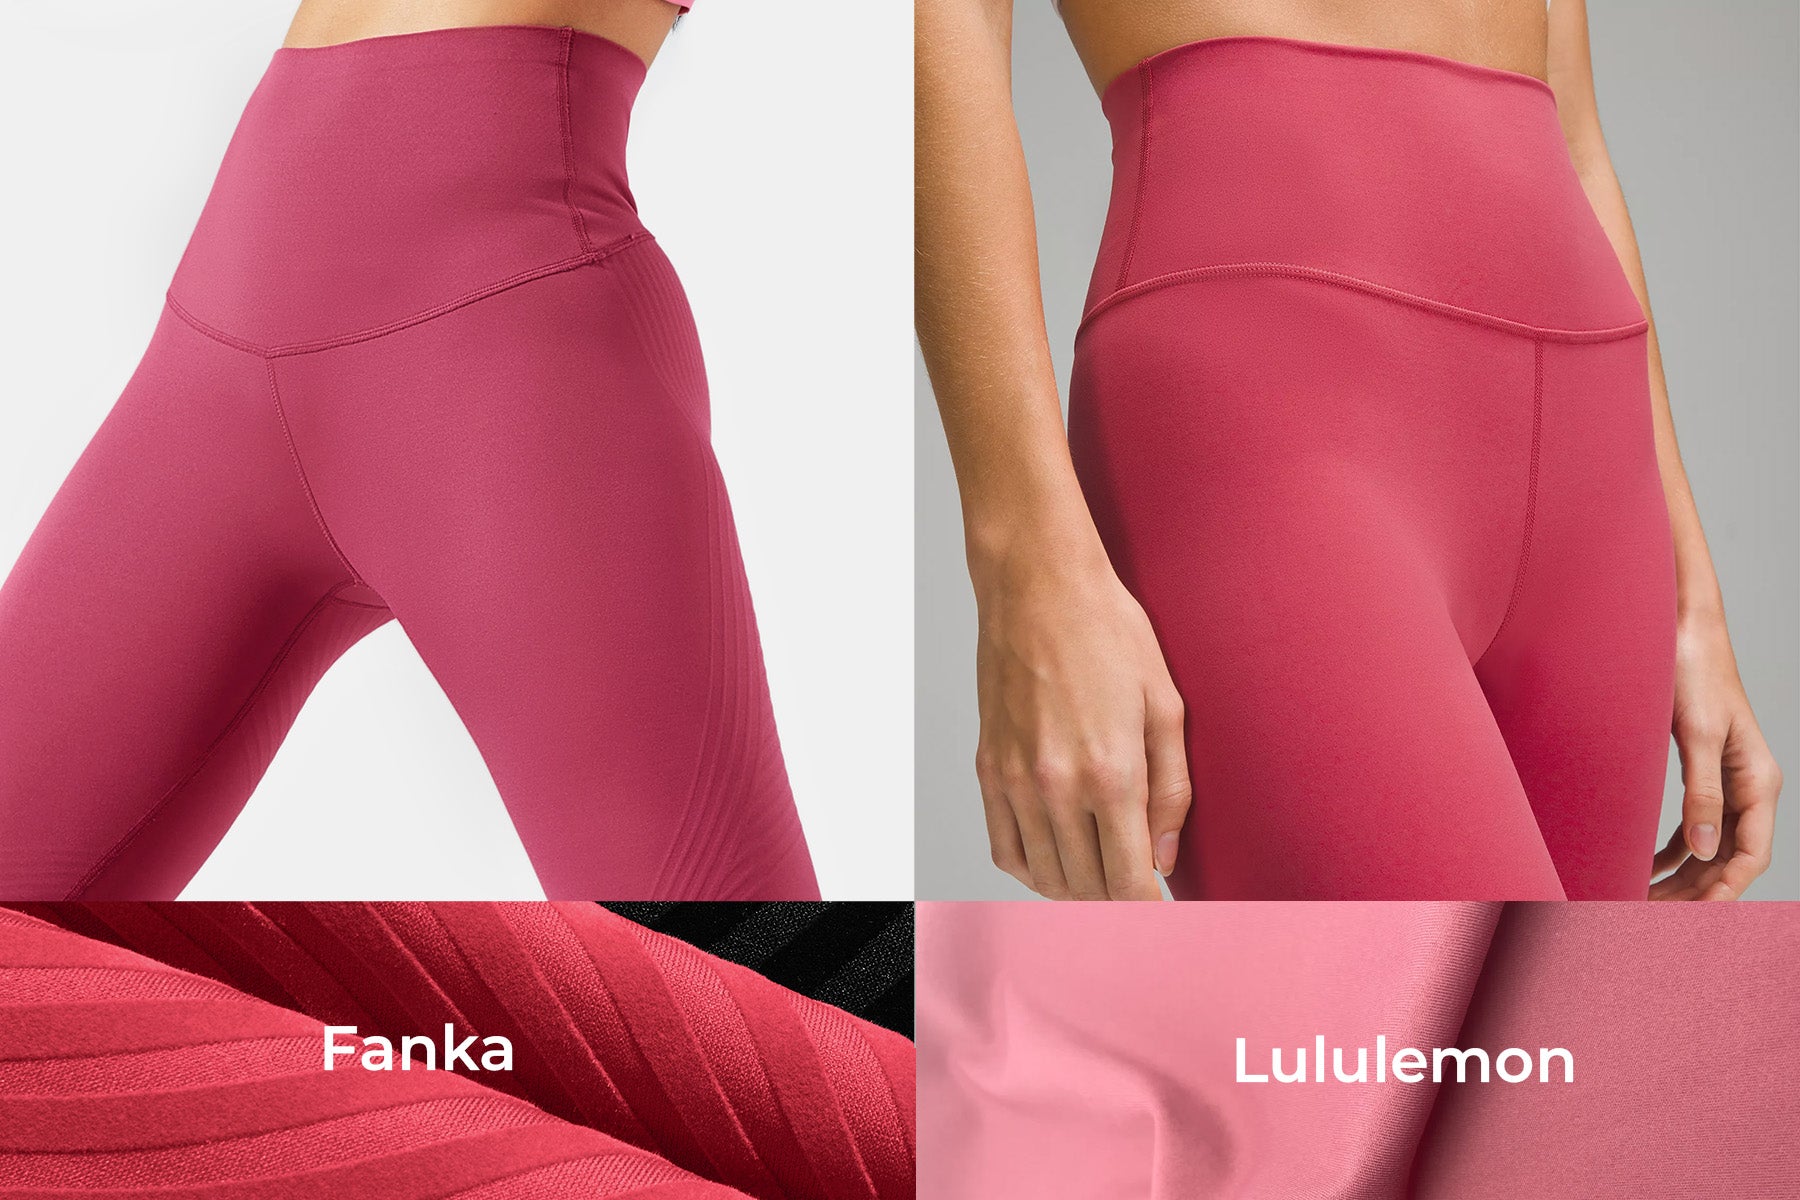 Why Are They the Best Functional Leggings for Dealing with